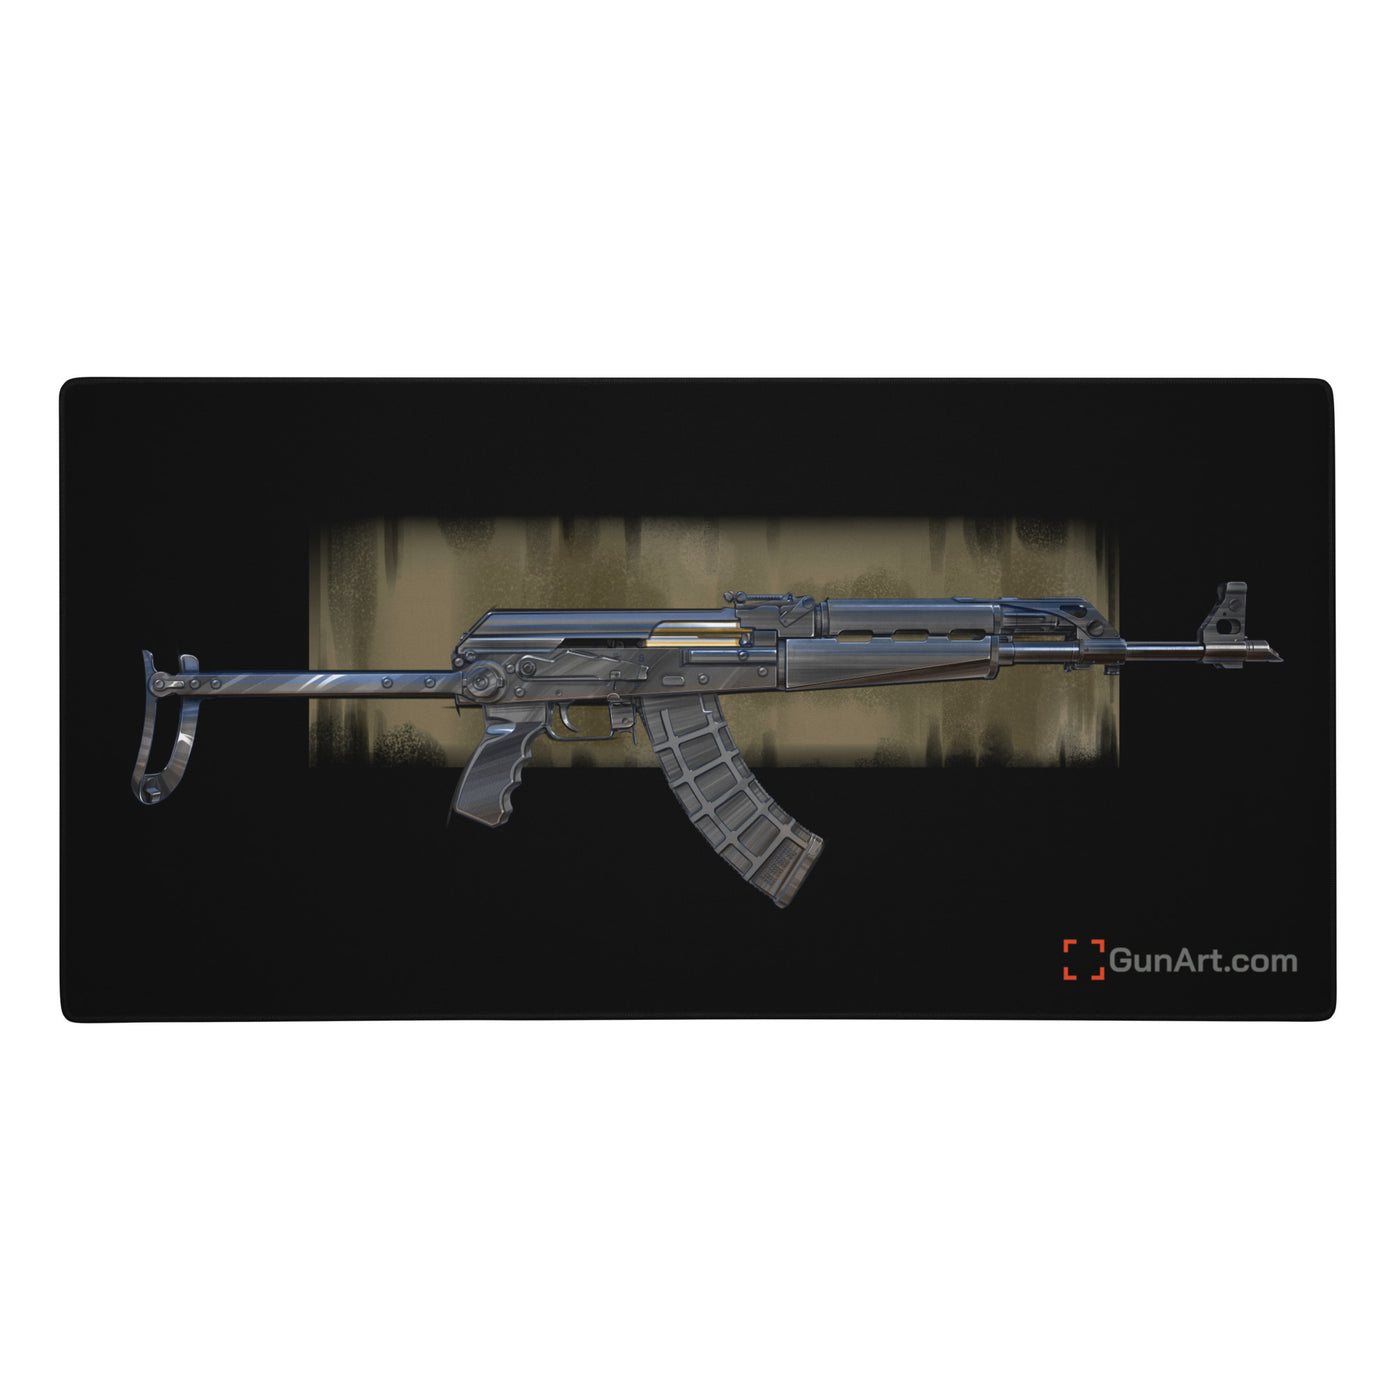 The Paratrooper / AK-47 Underfolder Gaming Mouse Pad